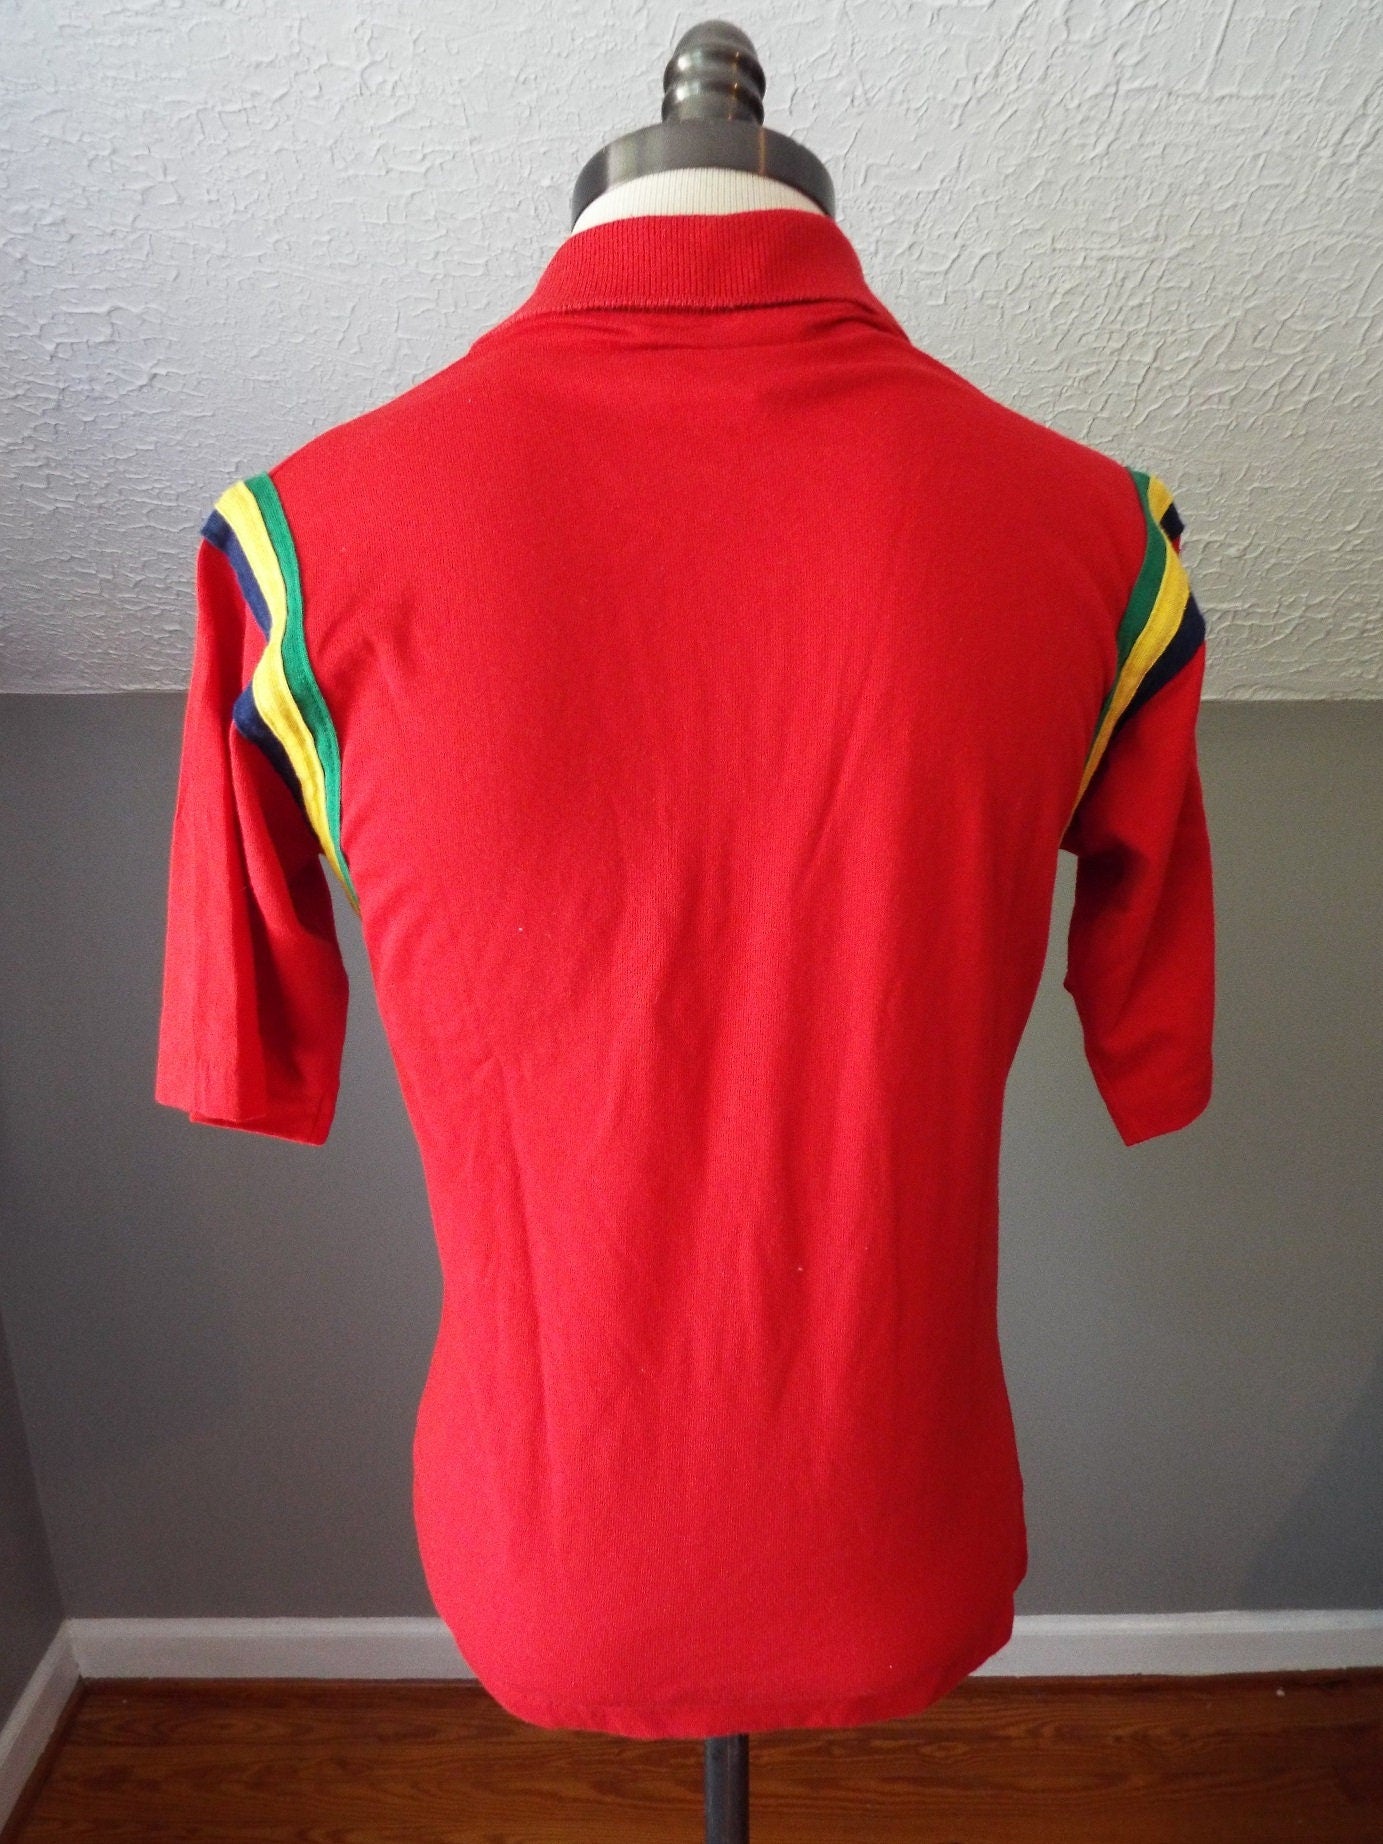 Vintage Youth Size Short Sleeve Red Polo Shirt by Medalist